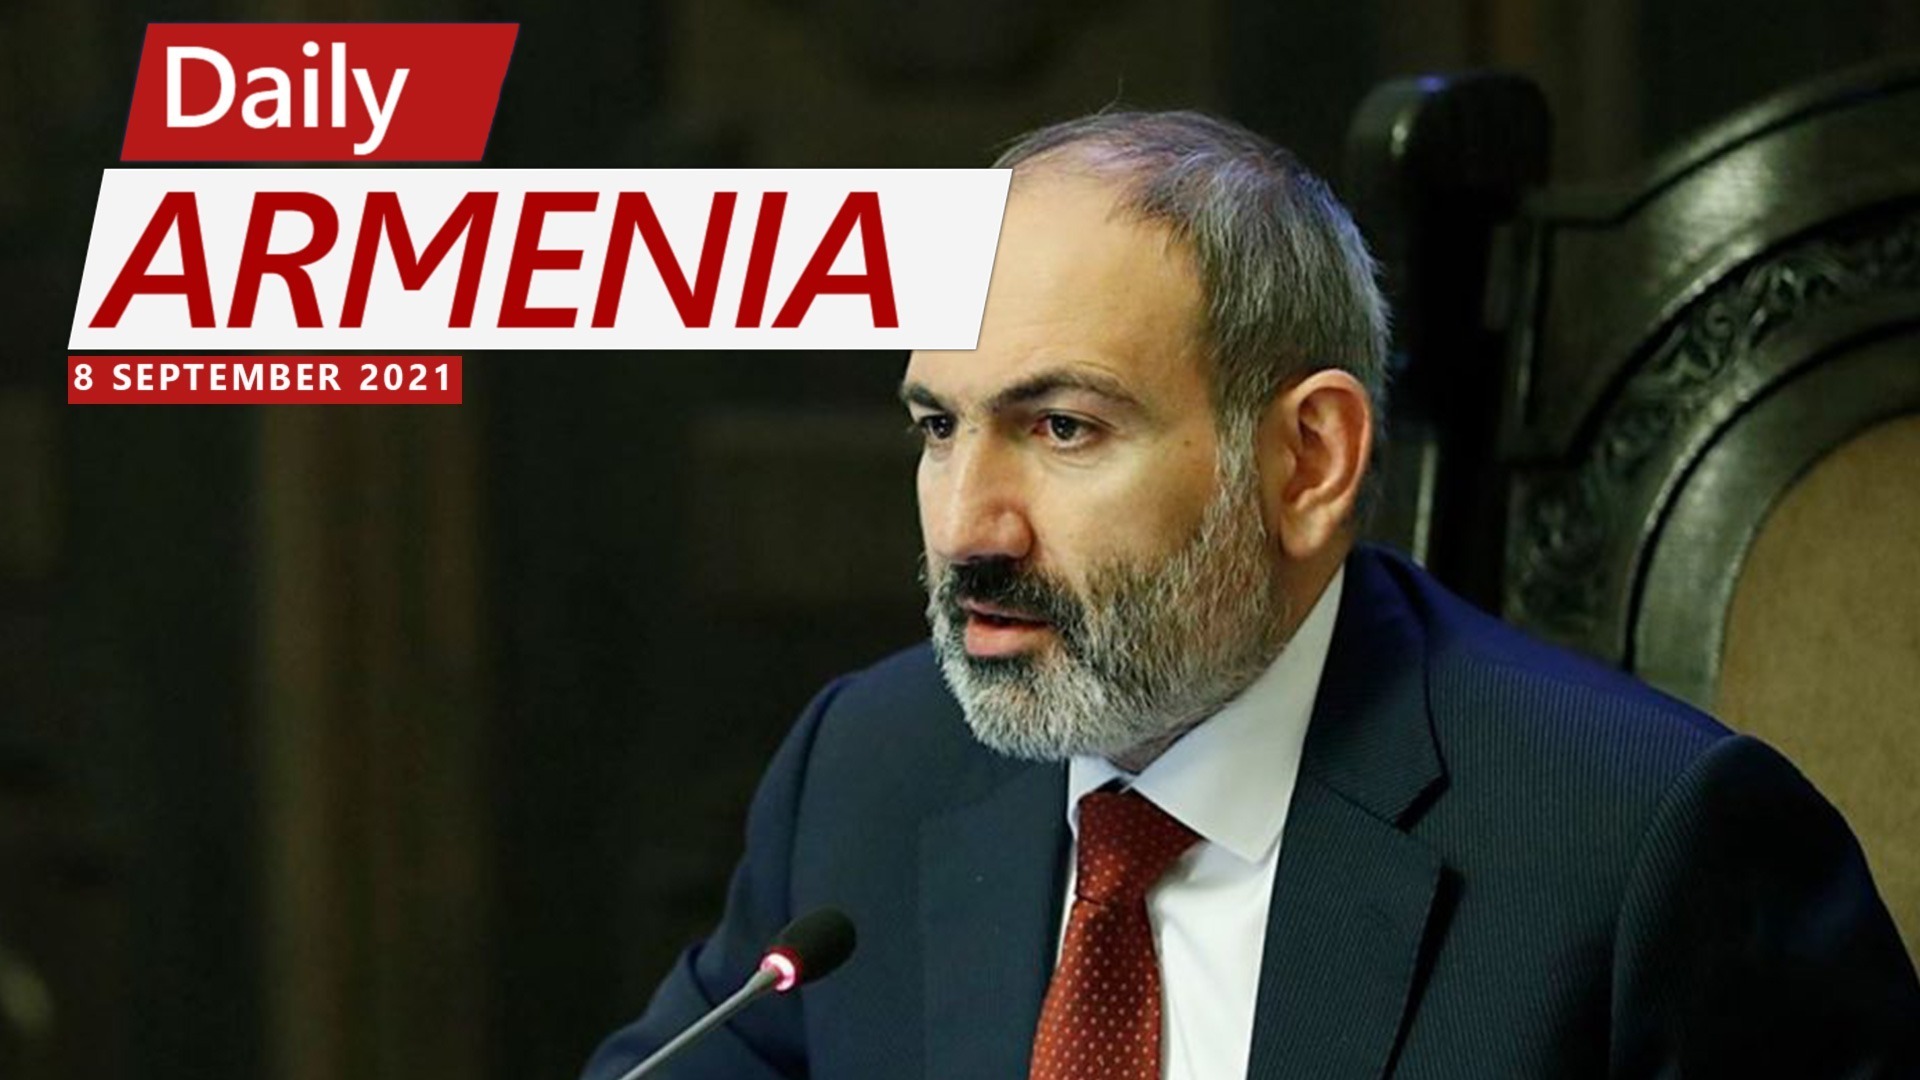 Normalizing relations with neighbors is priority for Armenia, says Pashinyan